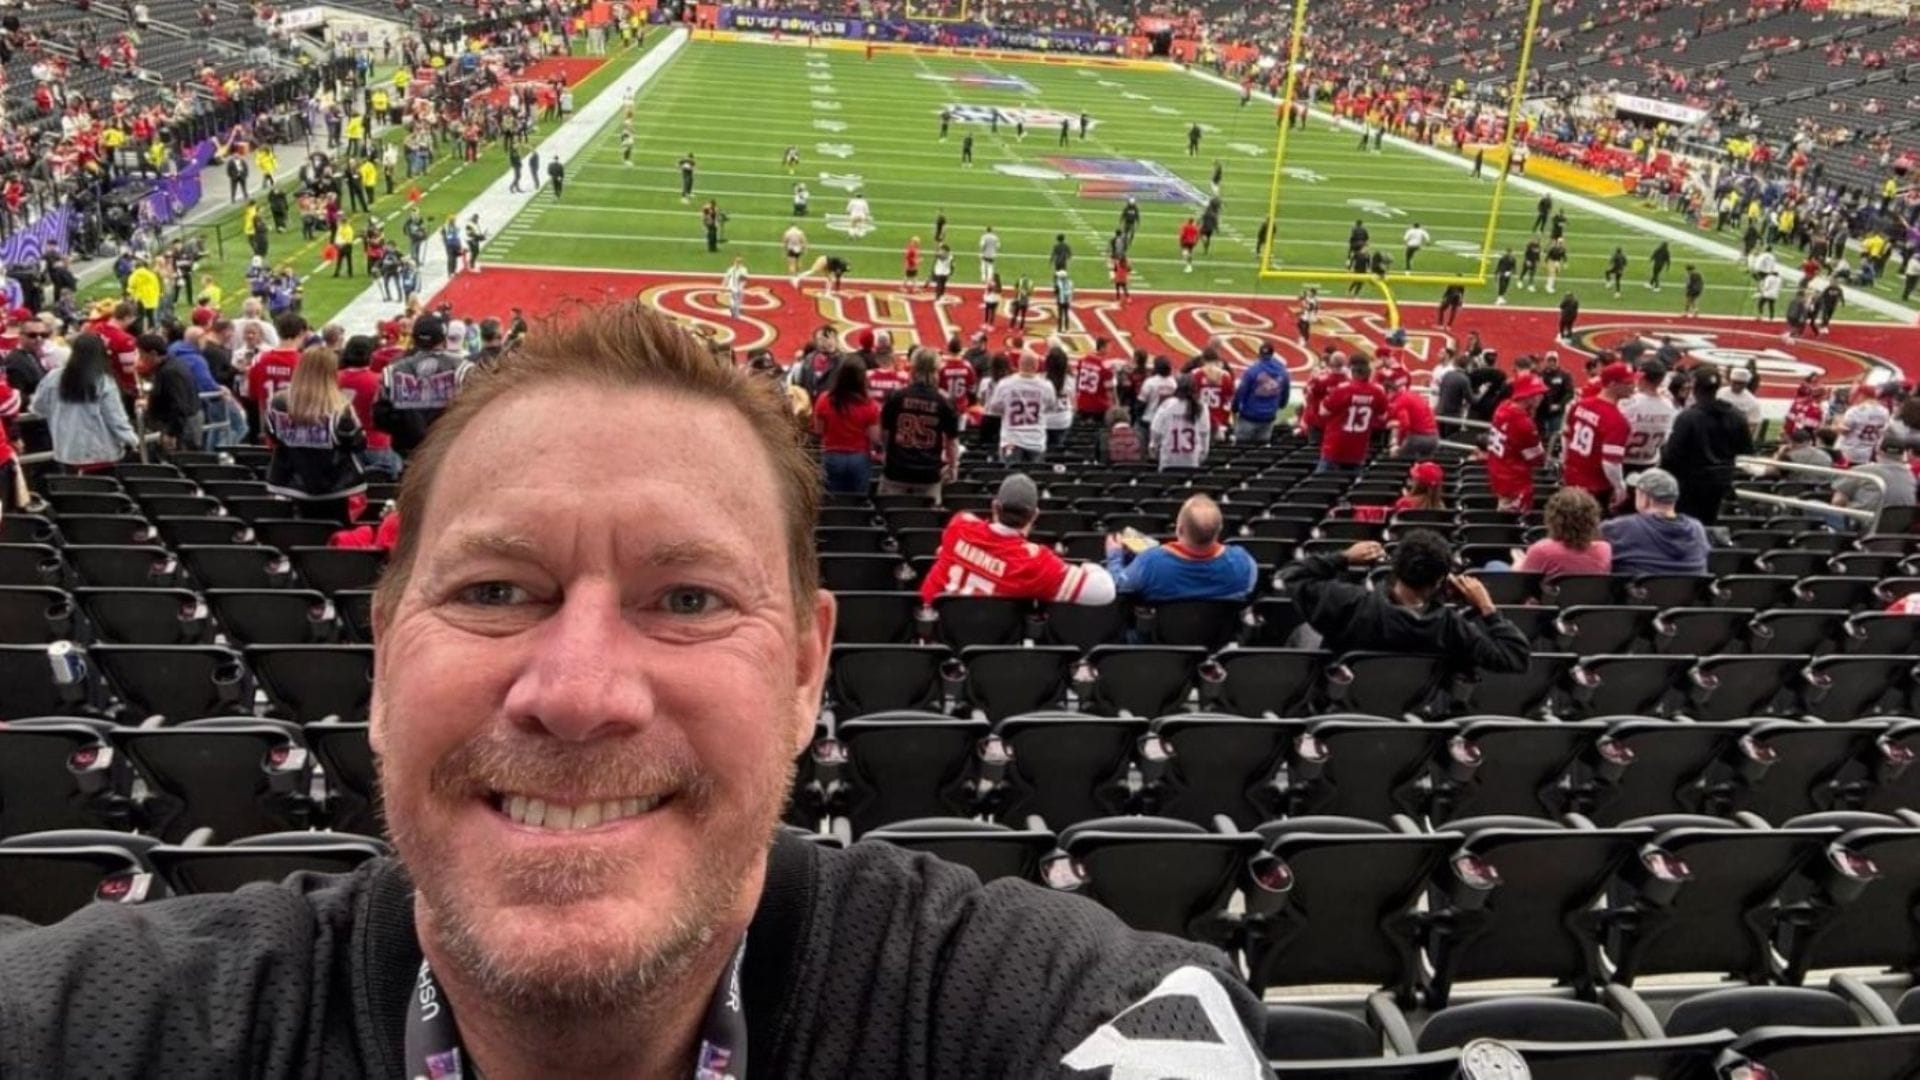 A man in a football jersey takes a selfie in a stadium.